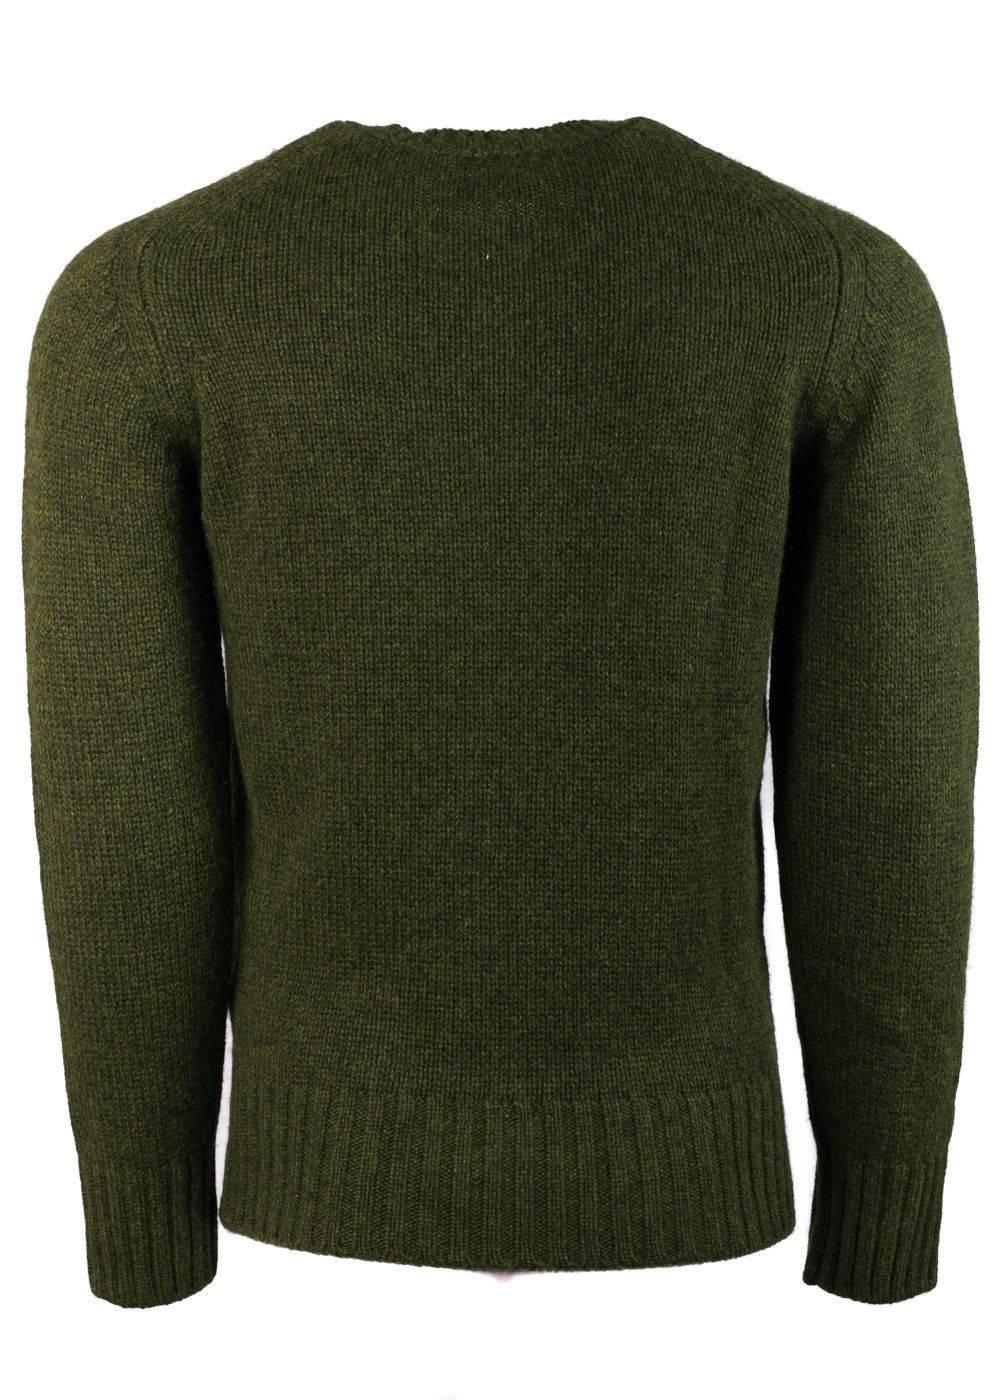 Brand New Tom Ford Raglan Sweater
Original with Tags 
Retails in Stores & Online for $1250
Size USA Medium

Cozy up in your Green Tom Ford Raglan Sweater. This season's loose knit luxury piece was designed using high grade cashmere for a